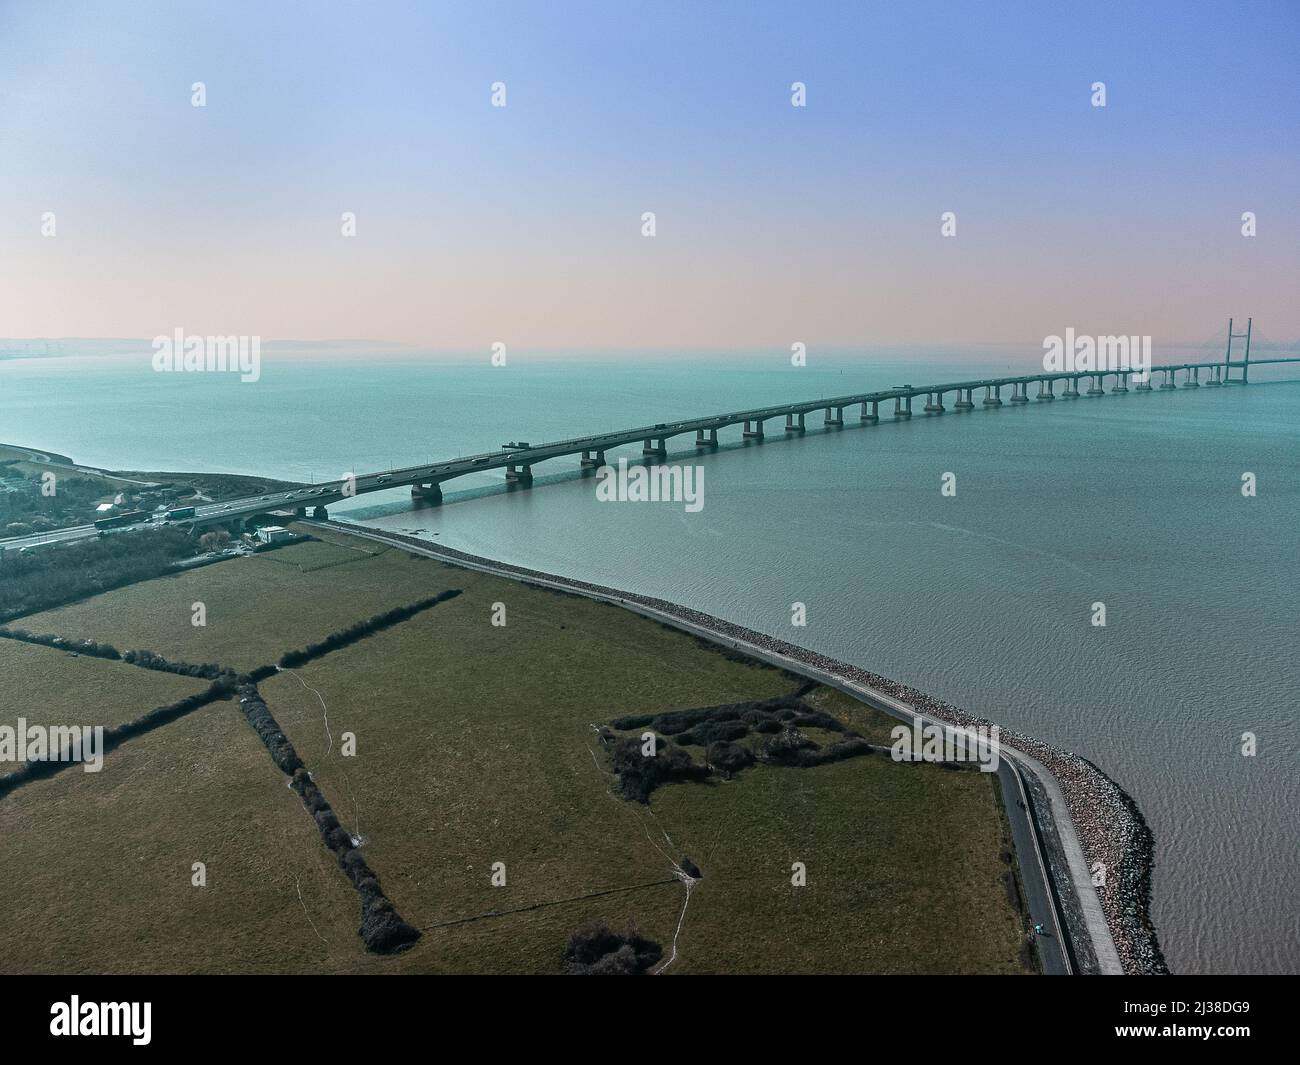 Aerial view of the Second Severn Crossing / Prince of Wales bridge carrying the M4 motorway between England and Wales across the Bristol Channel Stock Photo